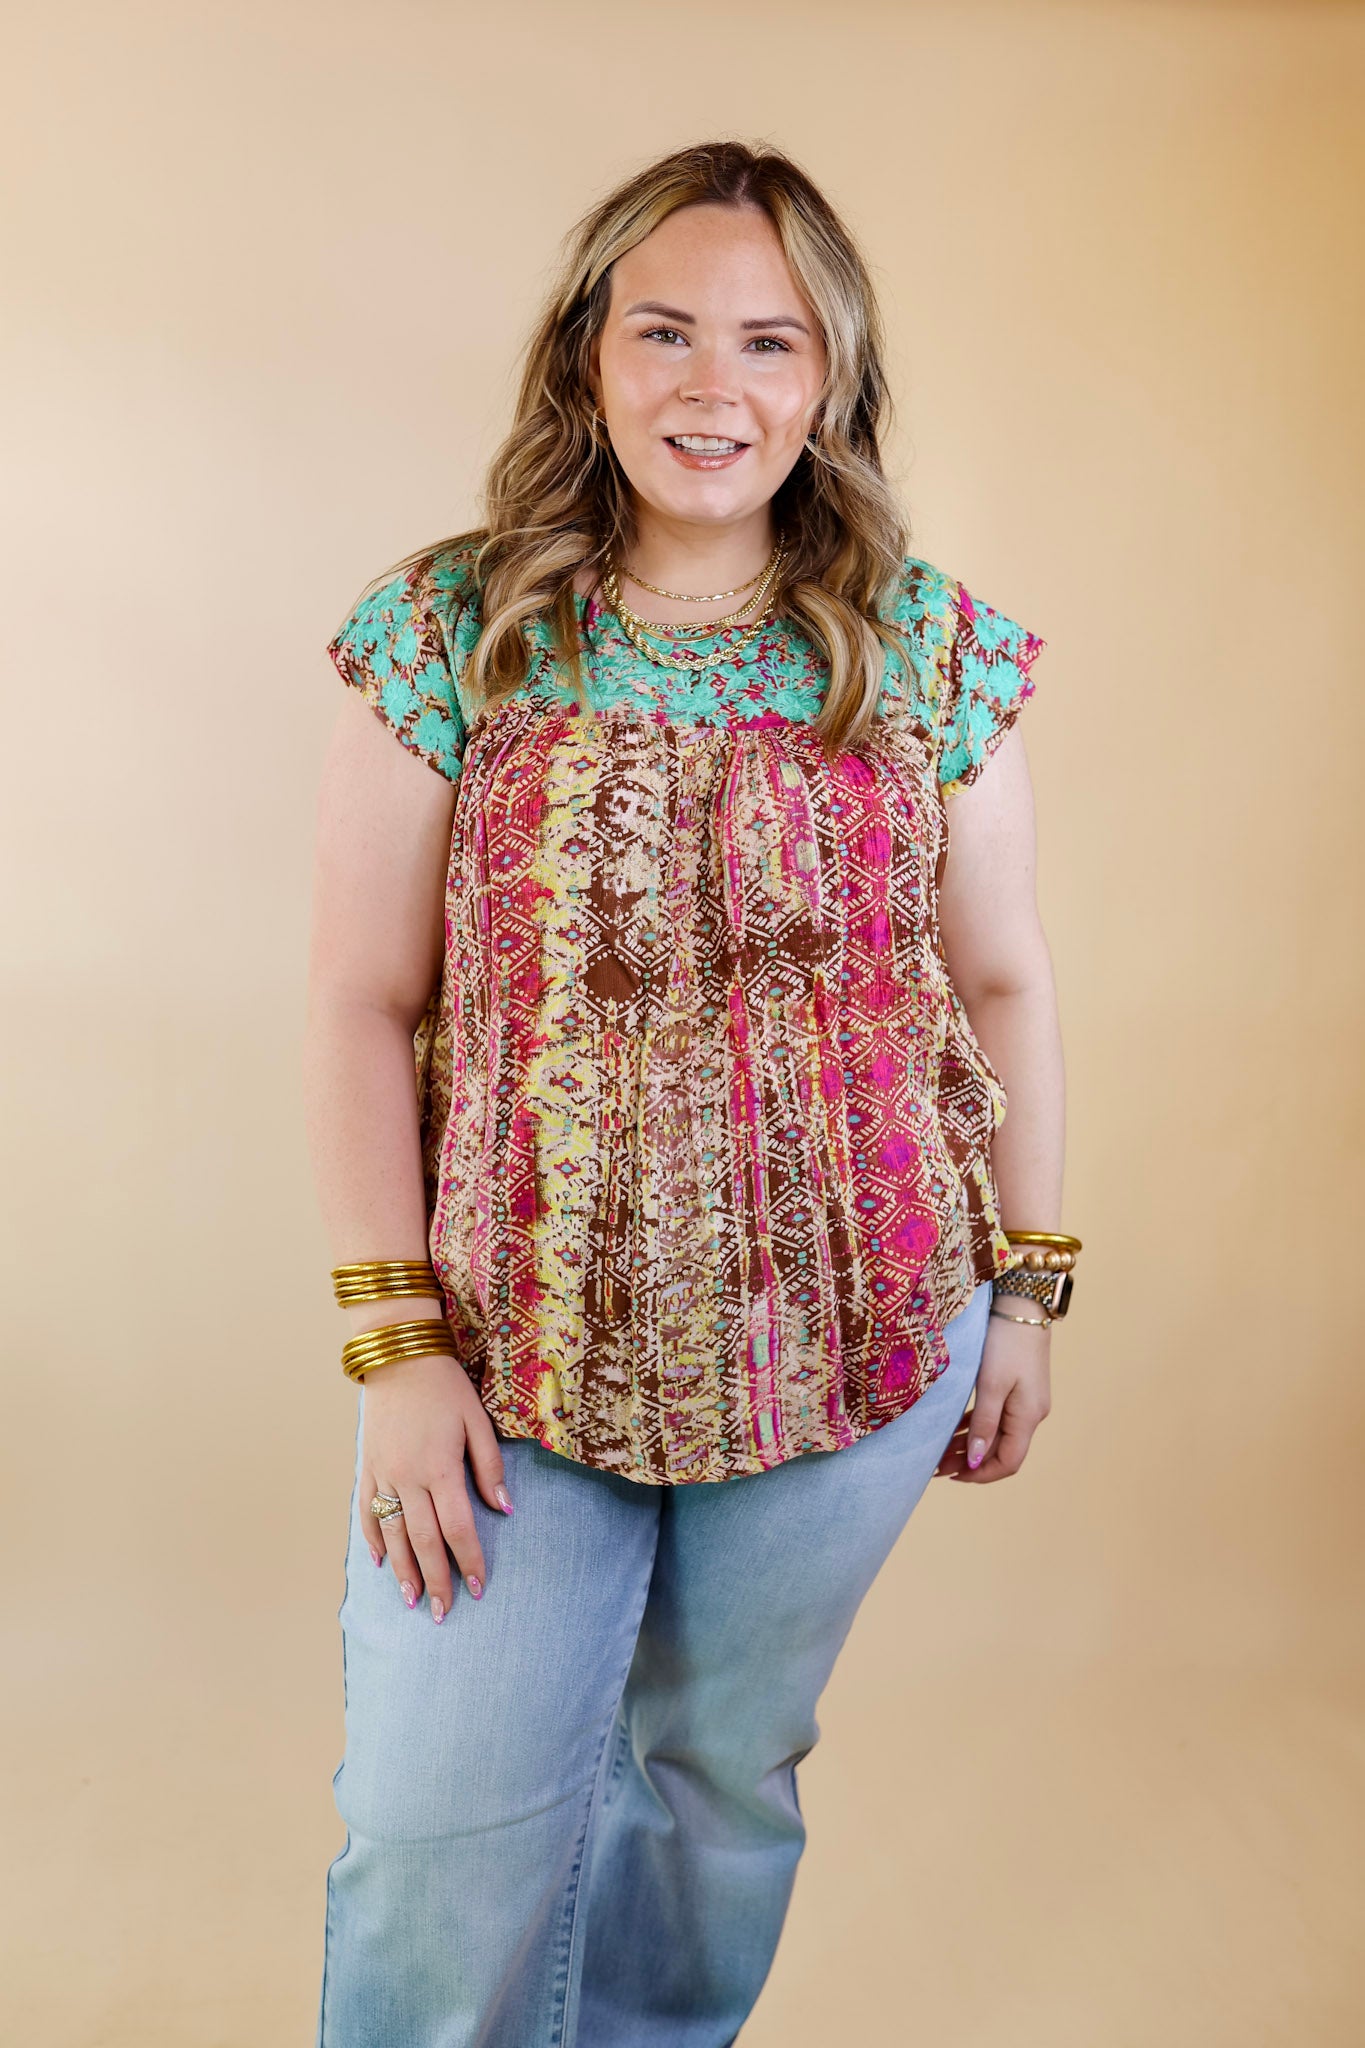 Festival Weather Turquoise Embroidered Tribal Print Top with Ruffle Cap Sleeves in Olive Green Mix - Giddy Up Glamour Boutique